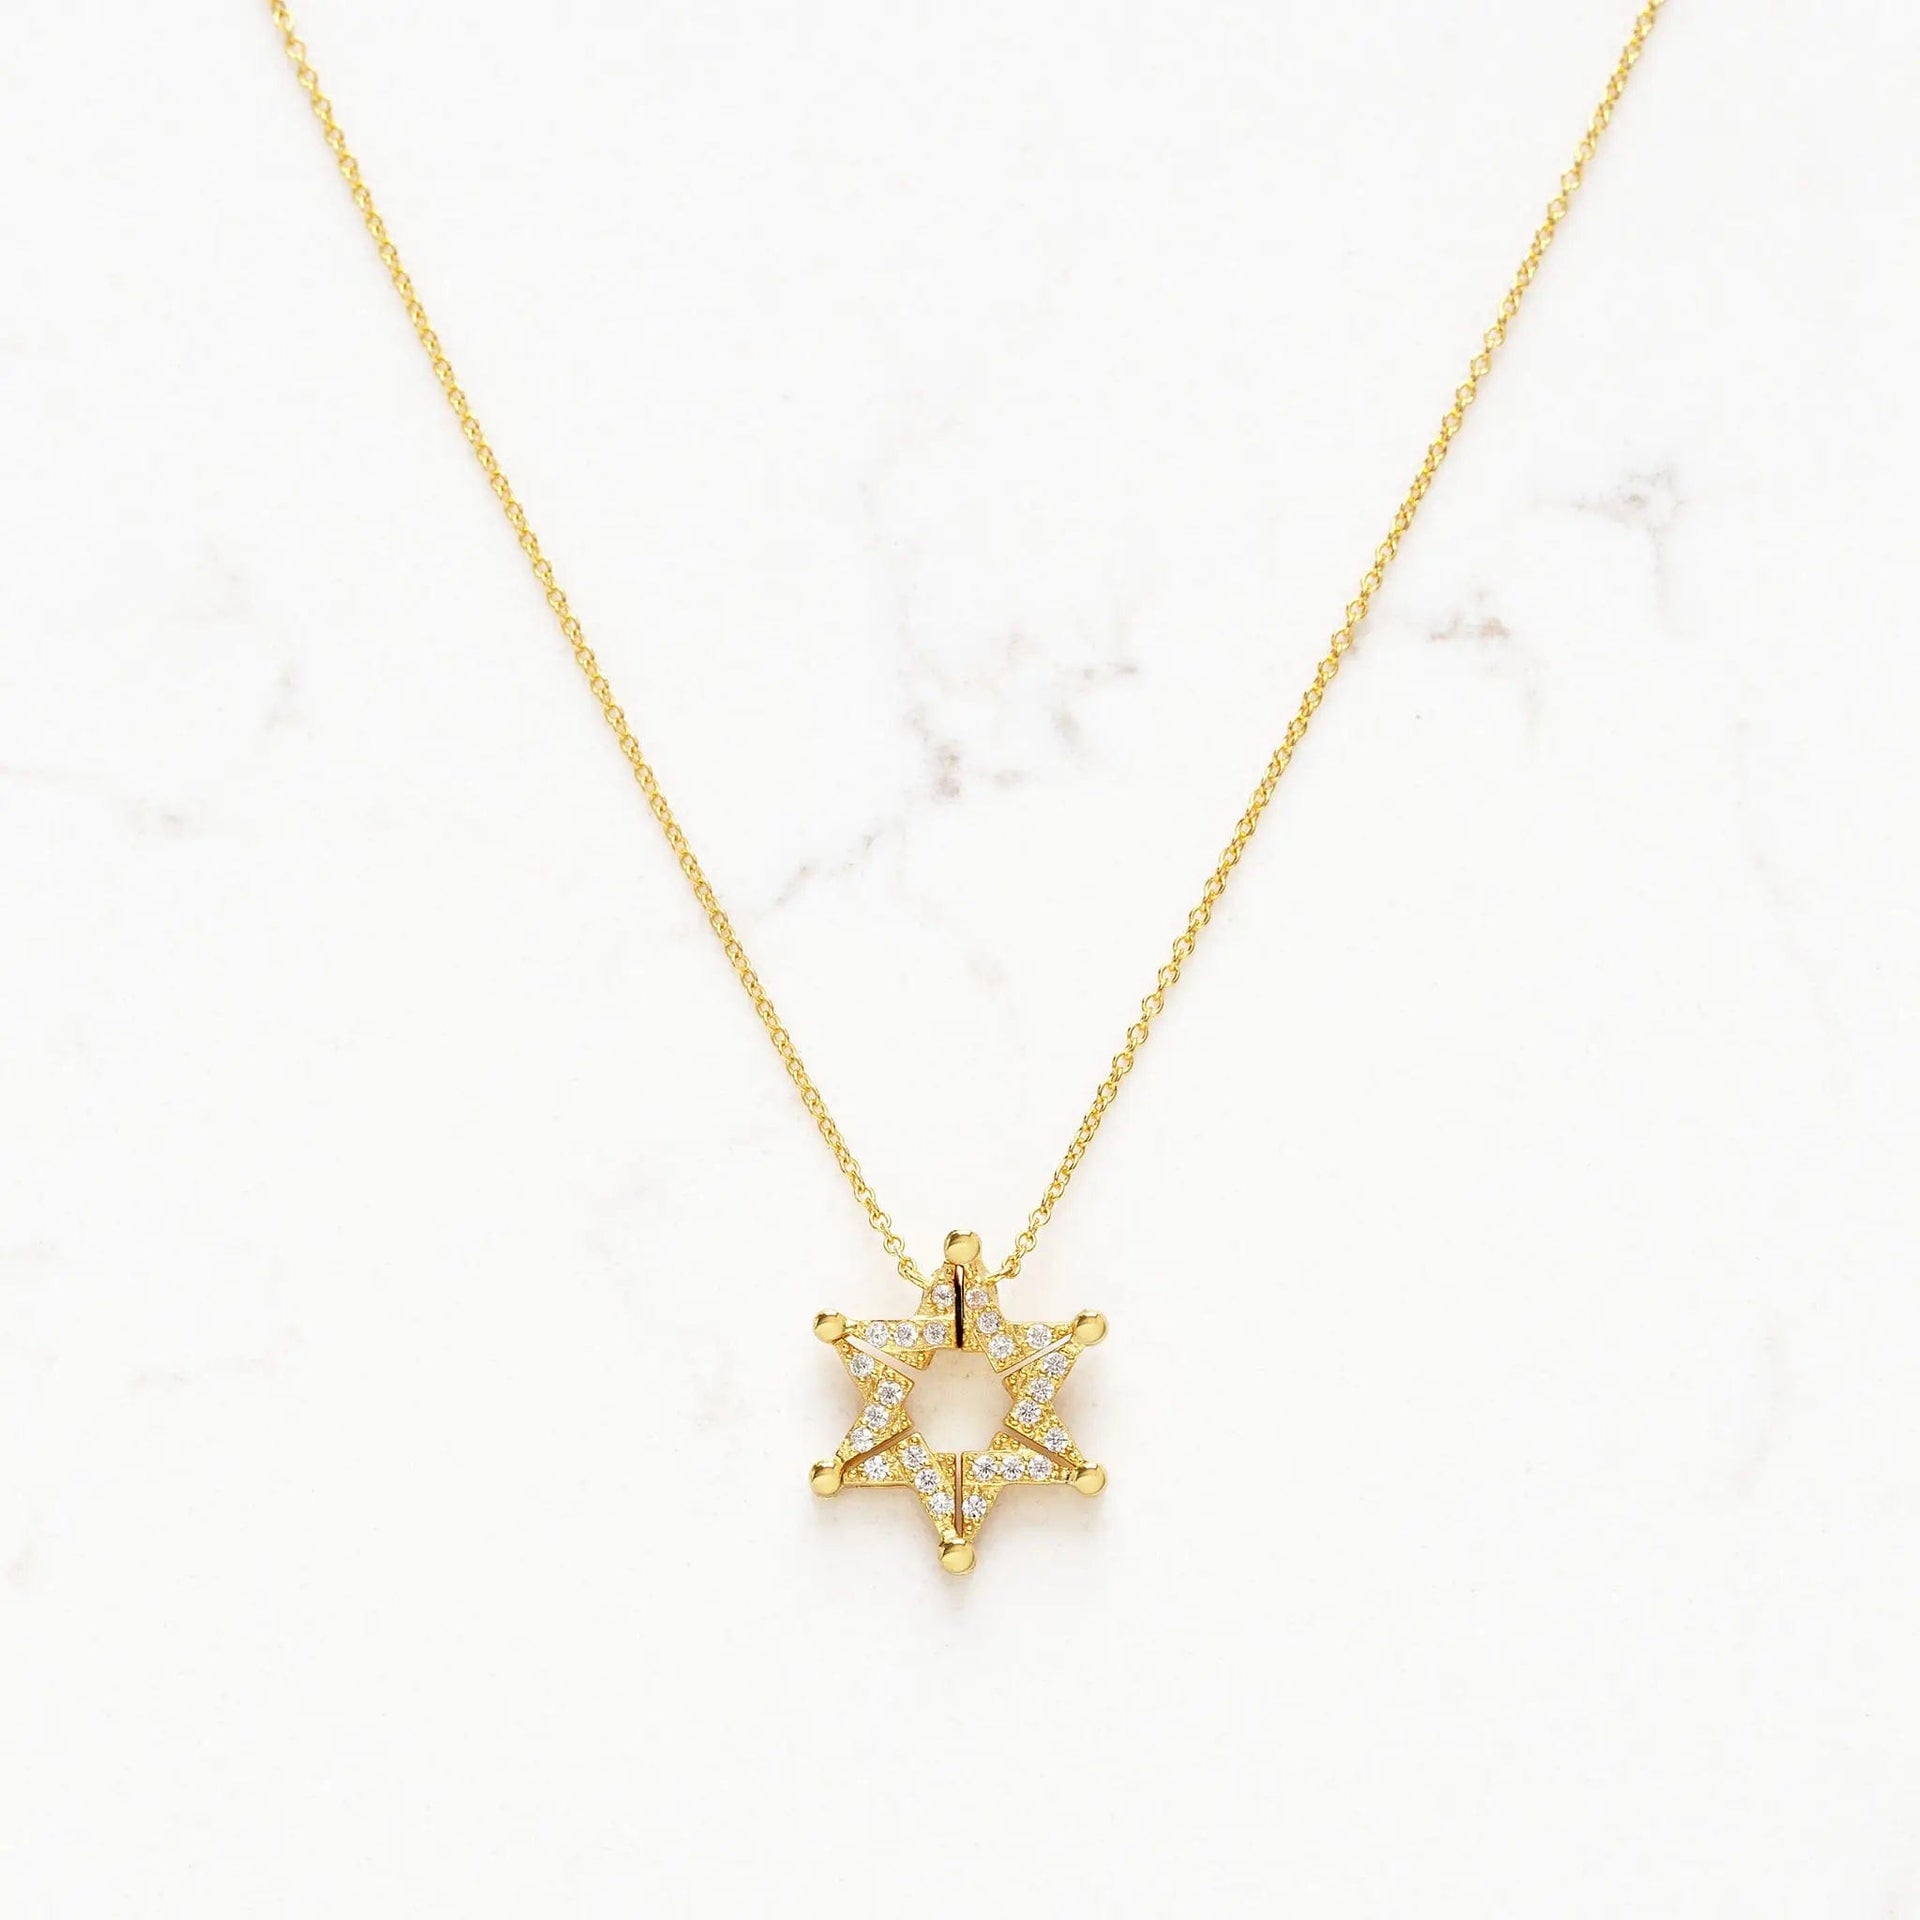 Stitch and Stone Necklaces Gold Butterfly Star of David Necklace - Gold Vermeil